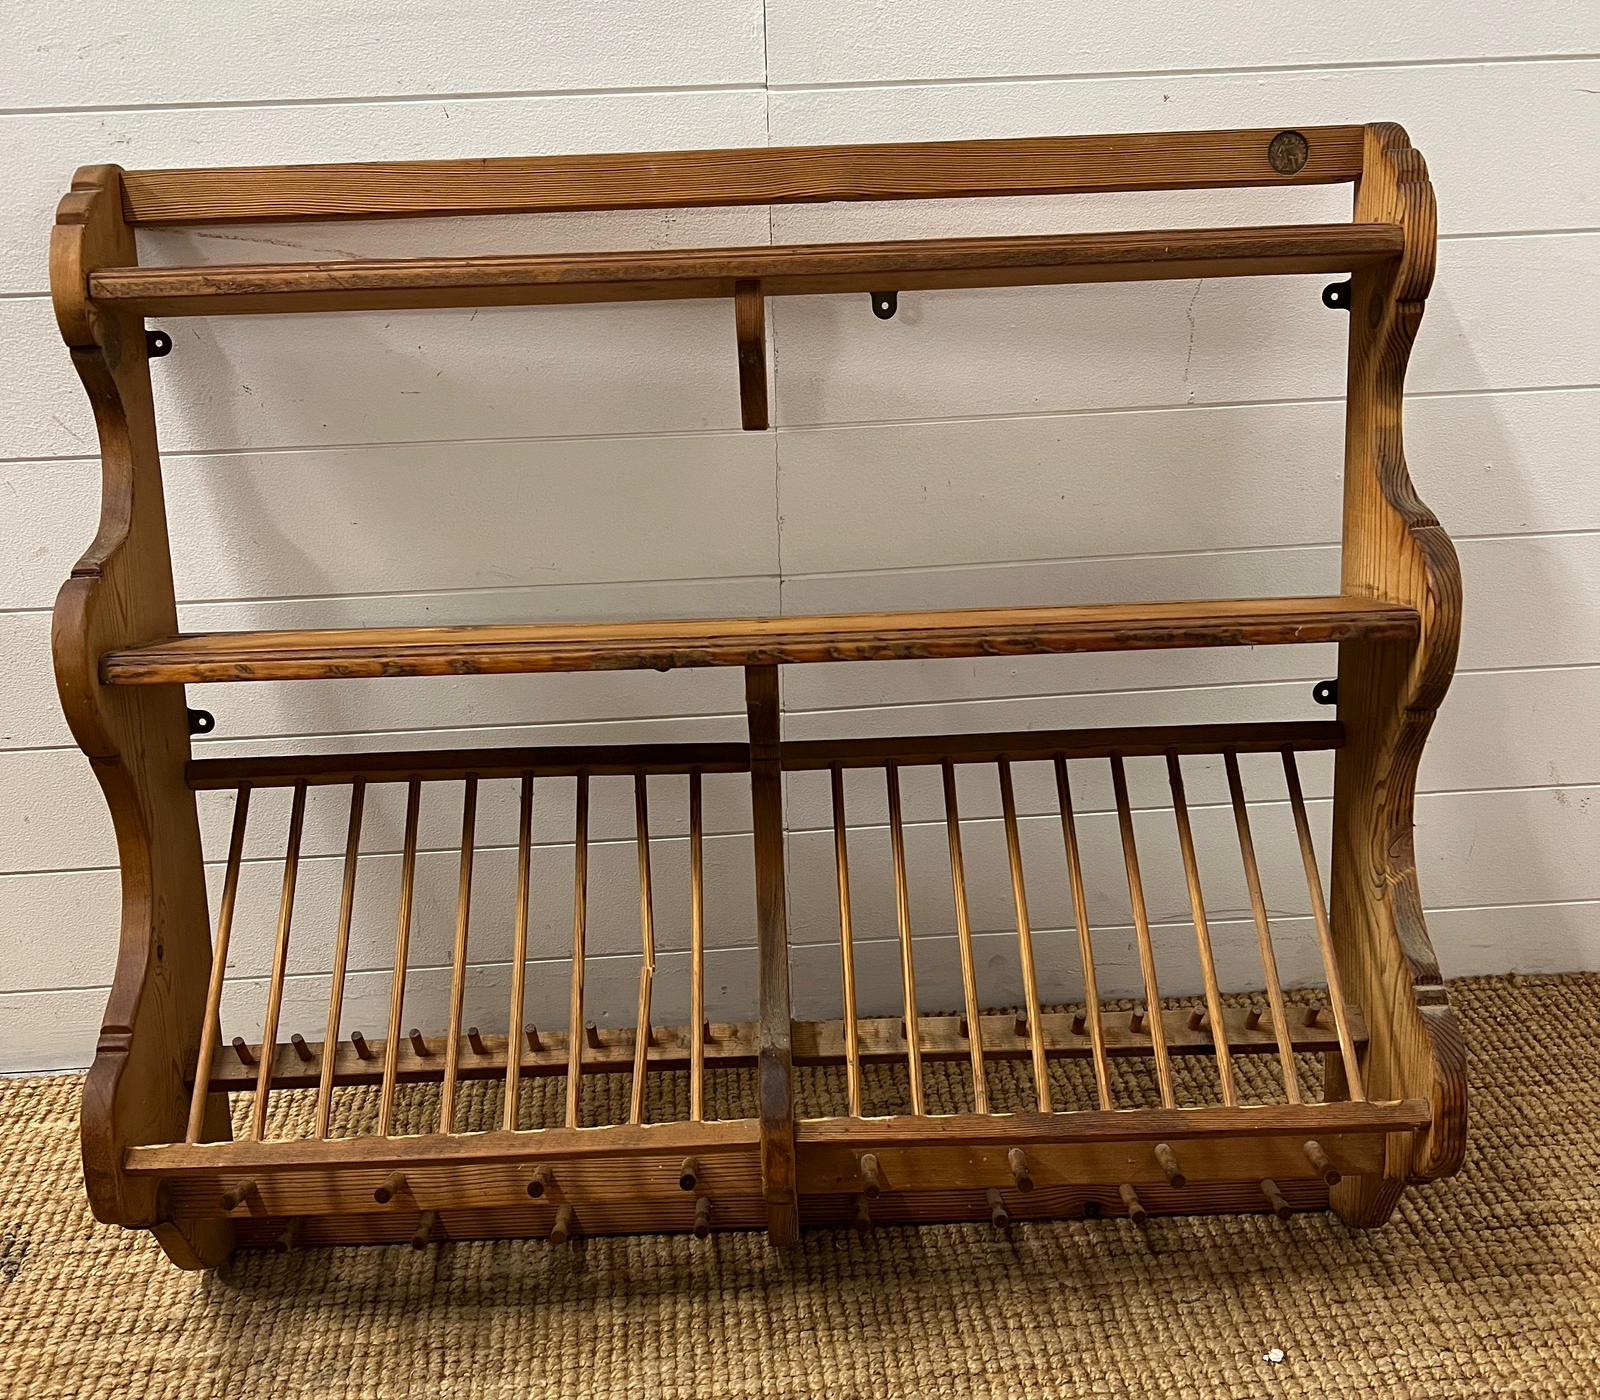 Pitch pine plate rack and hooks (H86cm W96cm D23cm)